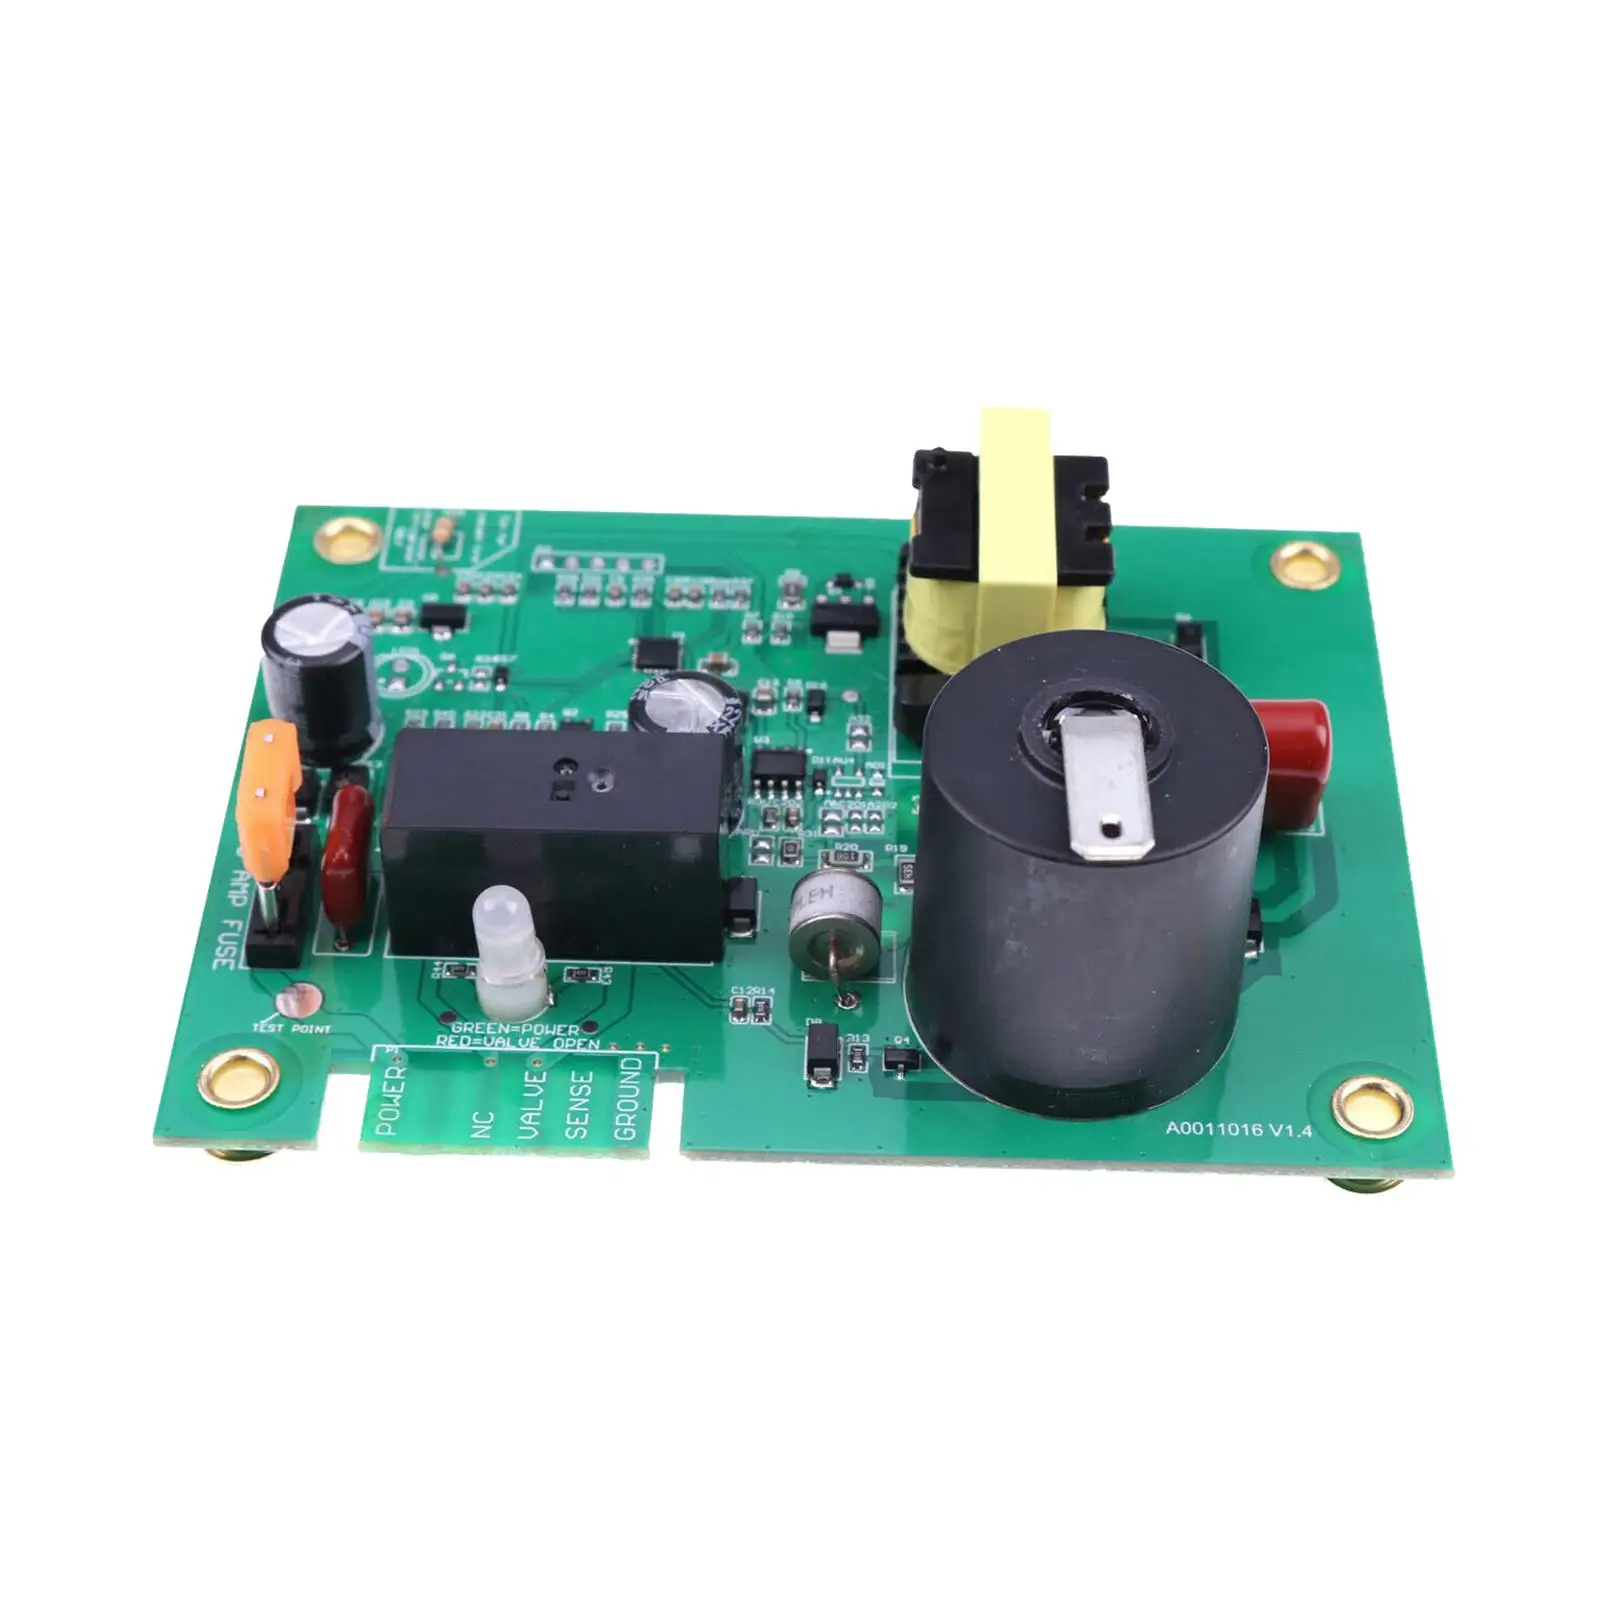 Ignition Control Circuit Board Uib S Dual Sense External Sense Connector 12V Replacement Module Board Easily to Install Sturdy